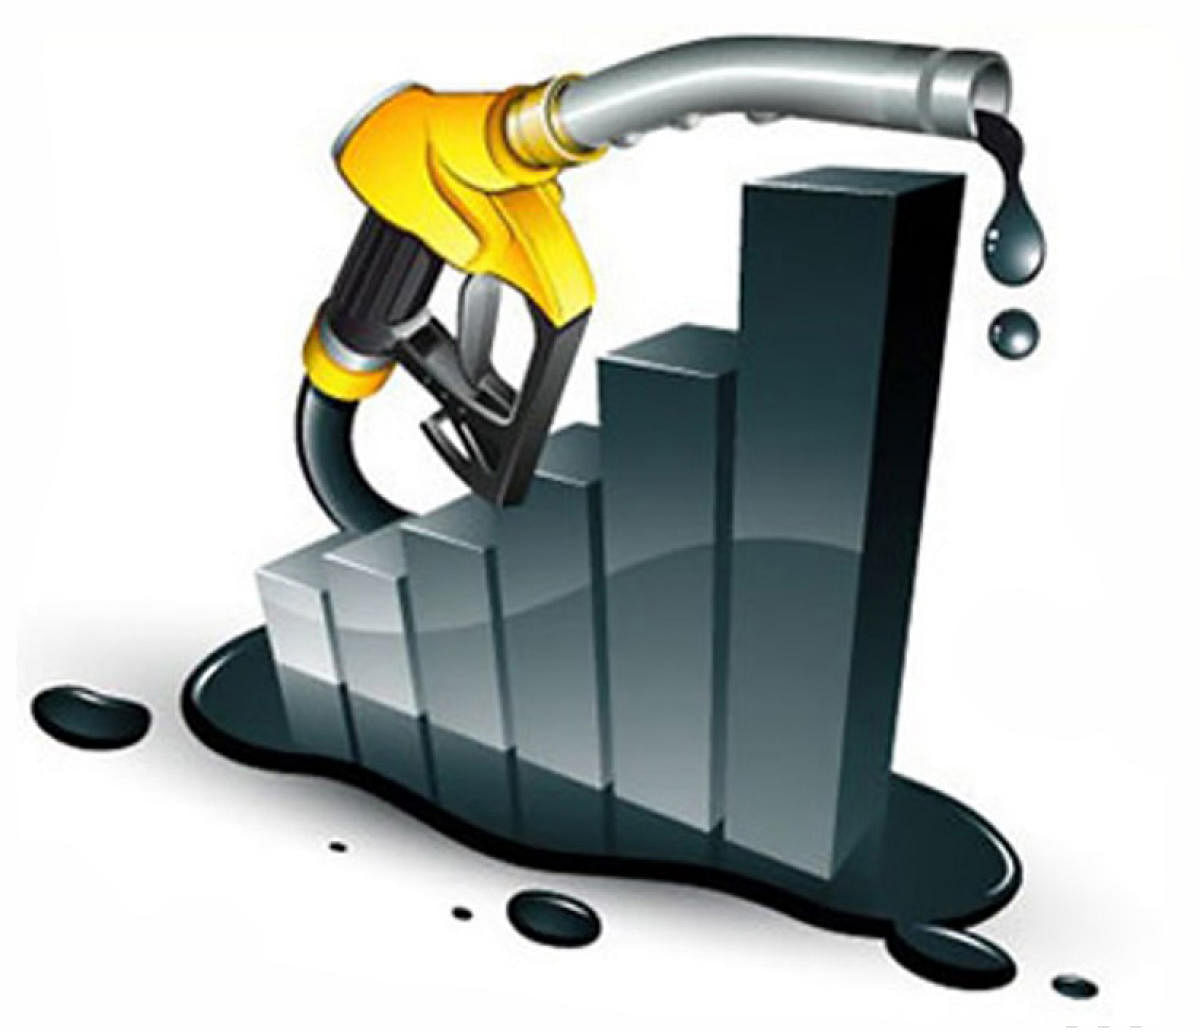 Kerala levies 31.8% and 24.52% tax on petrol and diesel price respectively and now the rates will be reduced by 1.69% and 1.75% for petrol and diesel respectively.